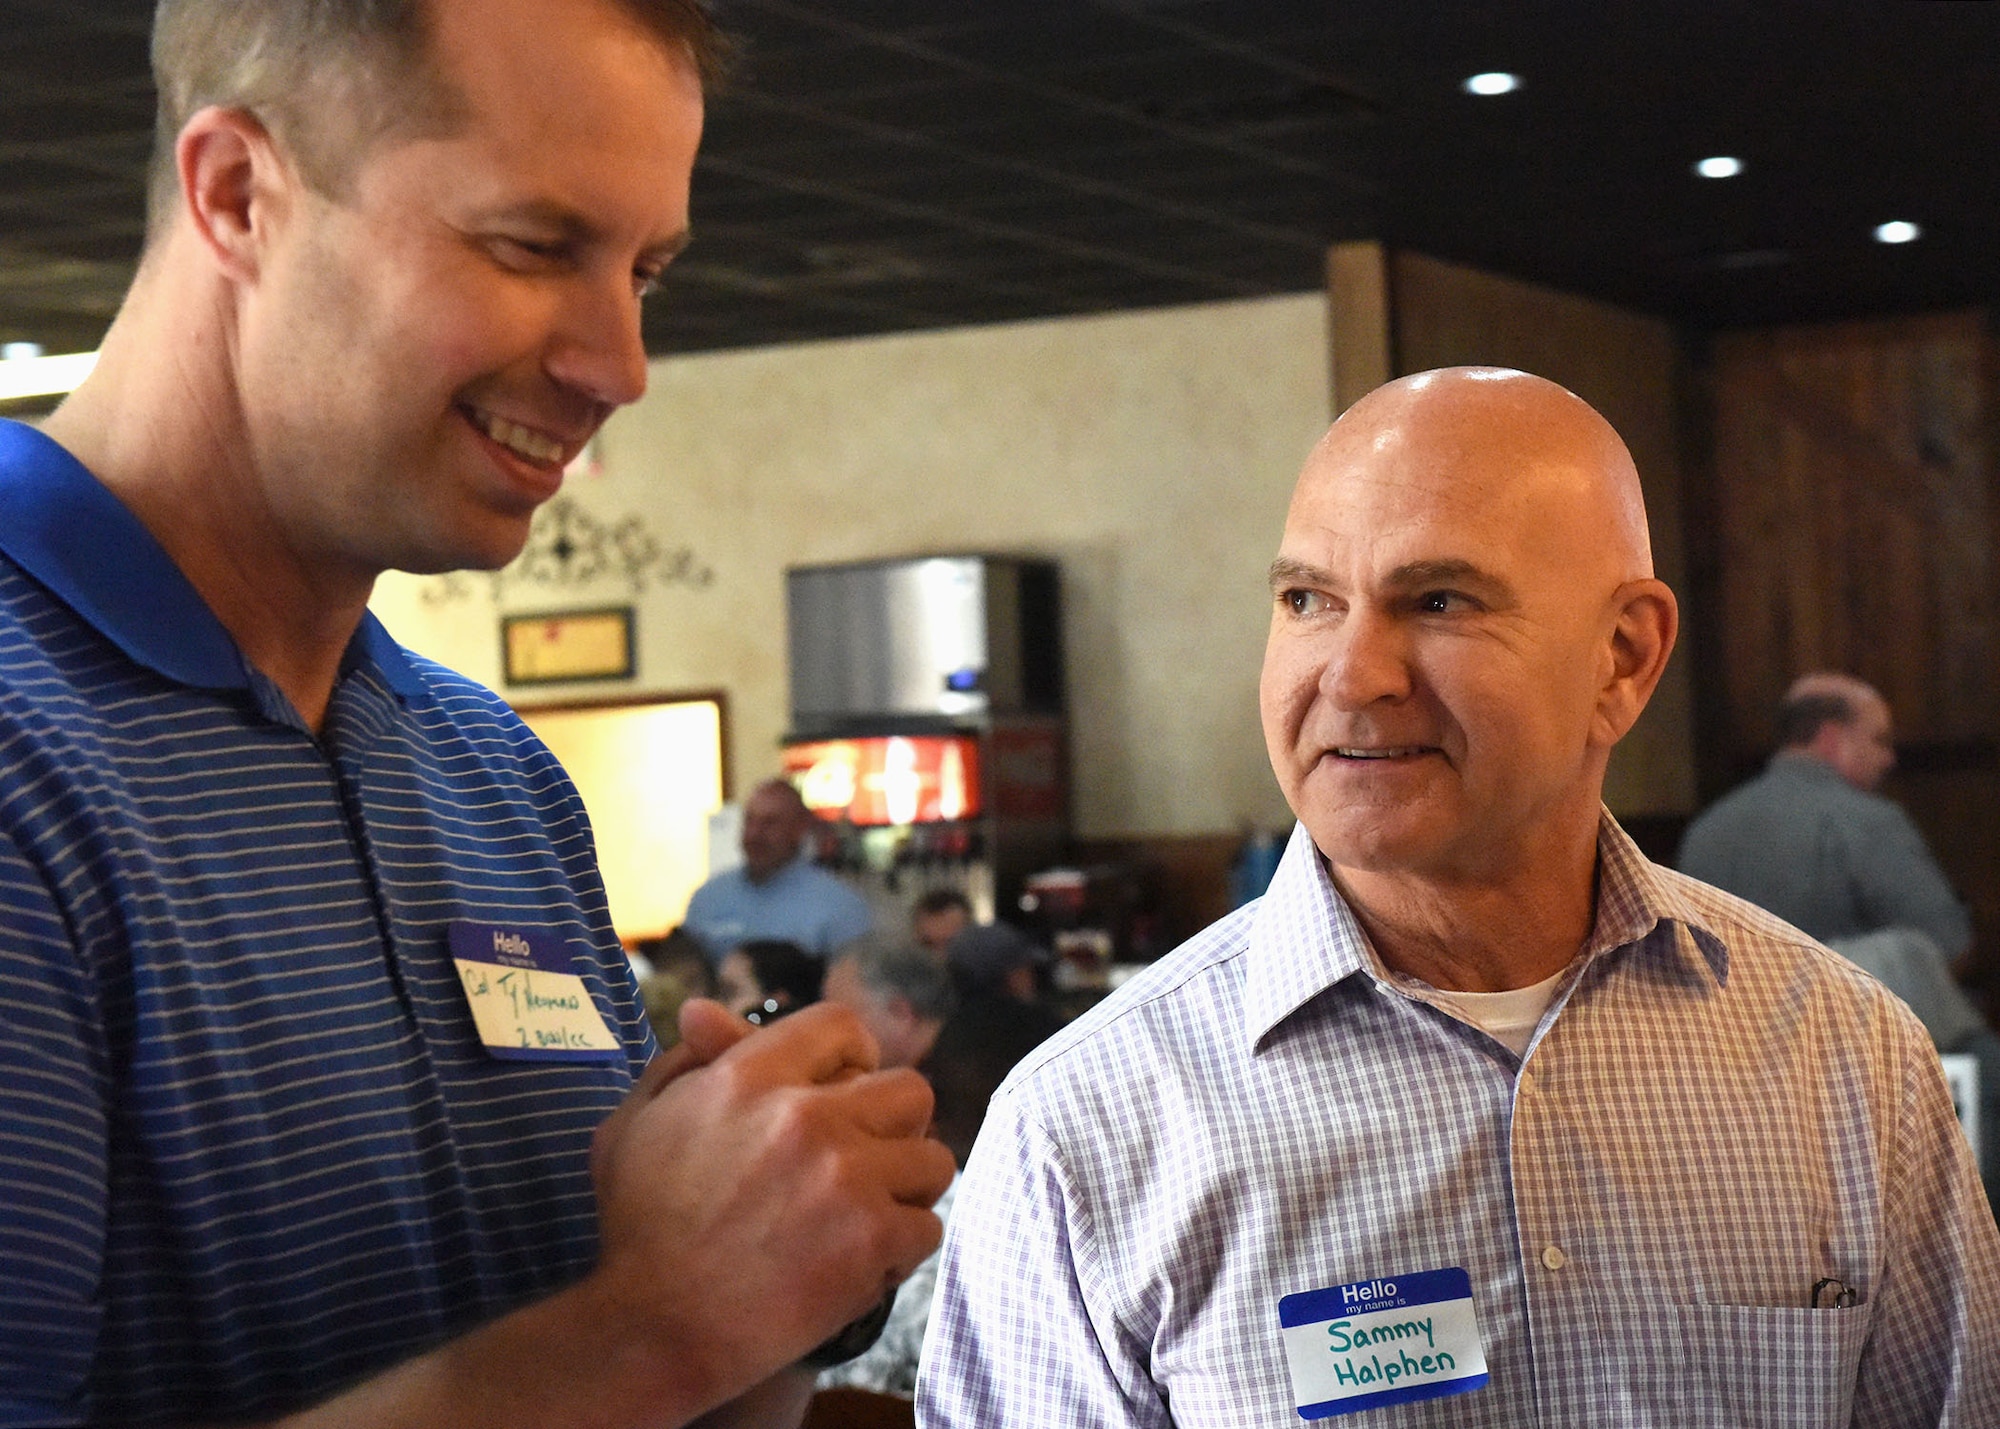 Sammy Halphen, volunteer and host family coordinator for Roots for Boots, speaks with Col. Ty Neuman, 2nd Bomb Wing commander, at the Roots for Boots kickoff event at Shane’s Seafood and BBQ in Bossier City, La., April 30, 2017. Halphen helped match families to their Airmen. (U.S. Air Force Photo/Airman 1st Class Sydney Bennett)